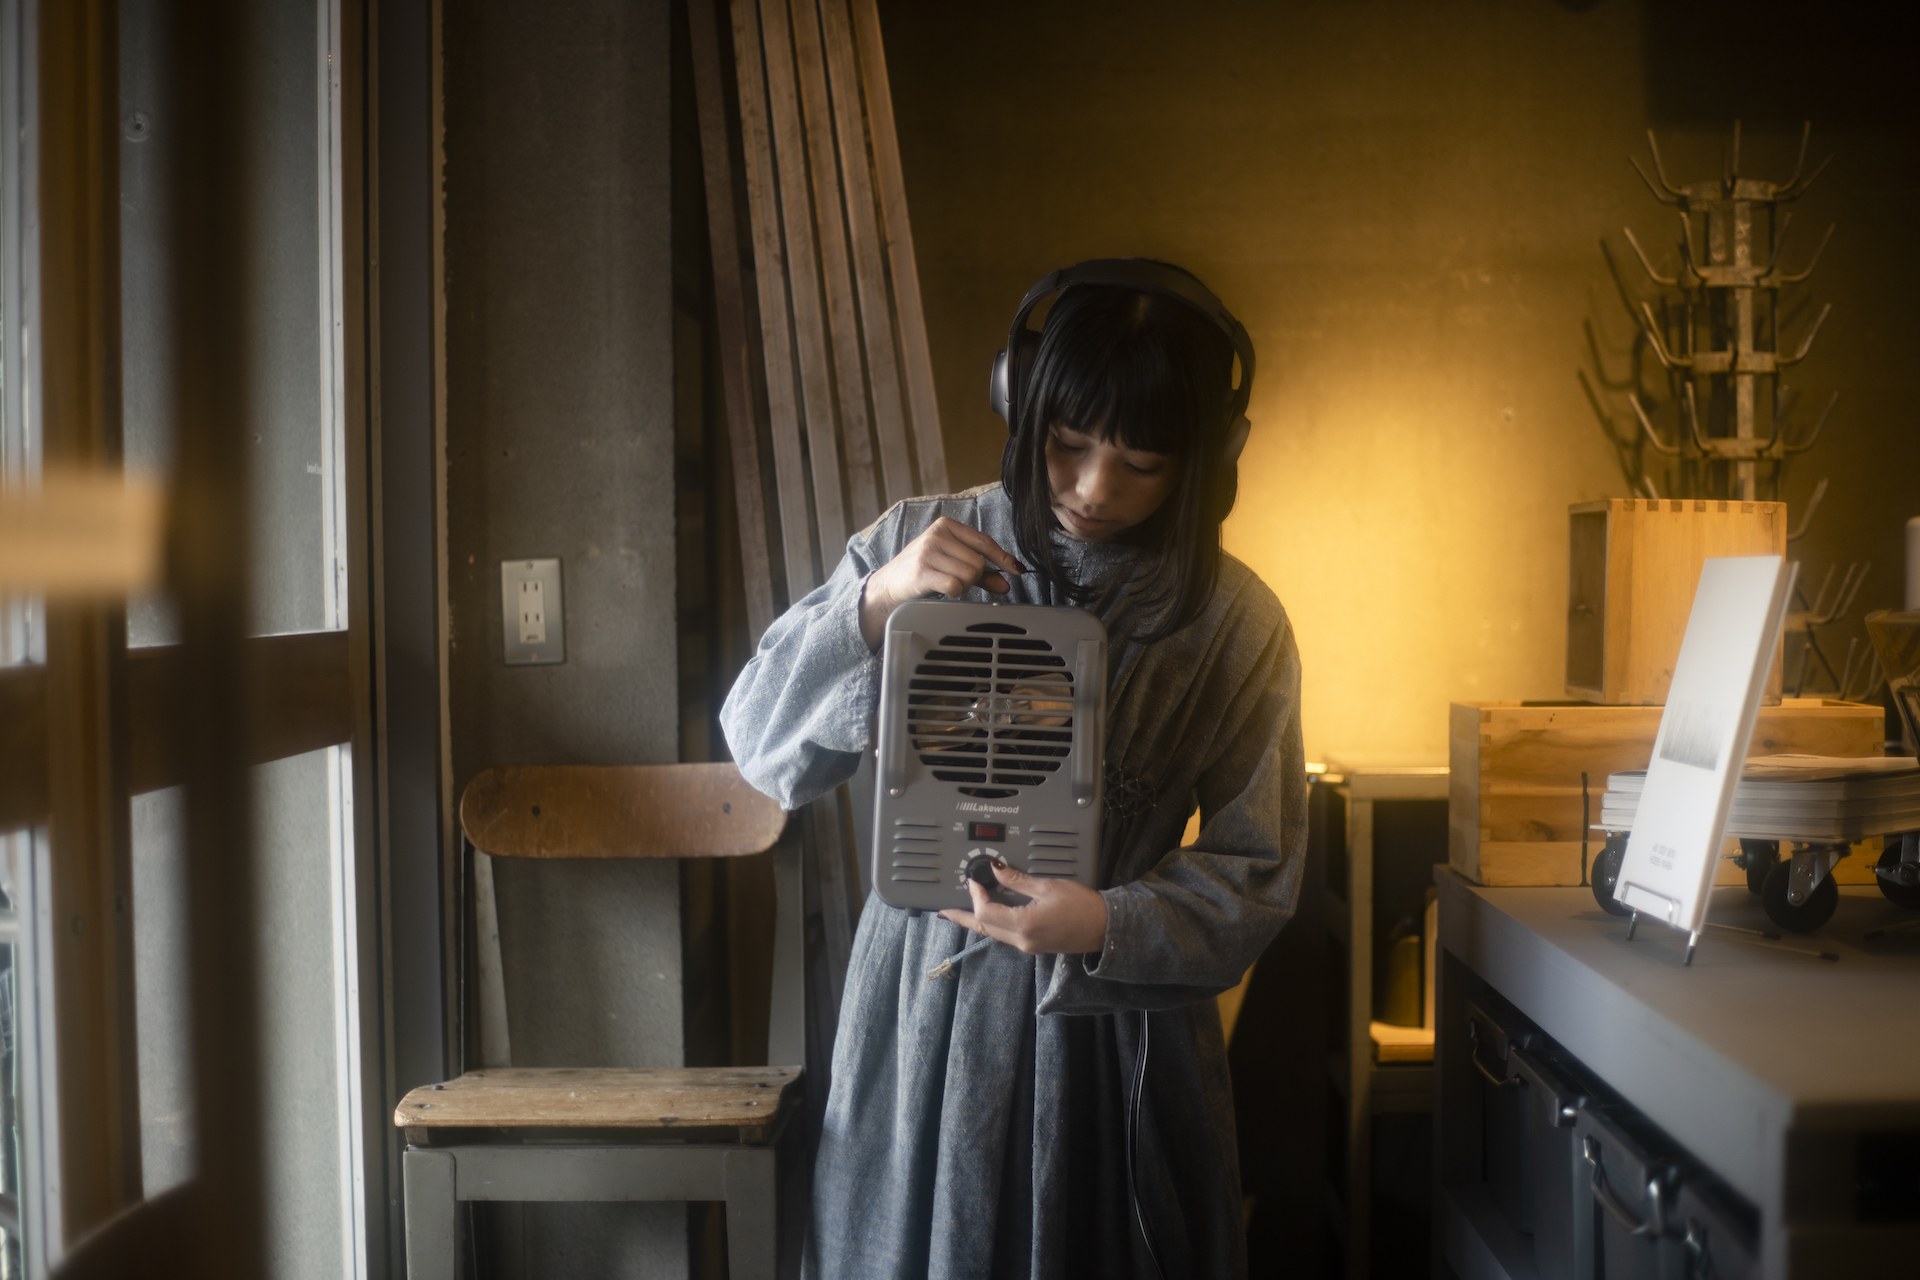 Sawako in a room wearing headphones and holding a device.